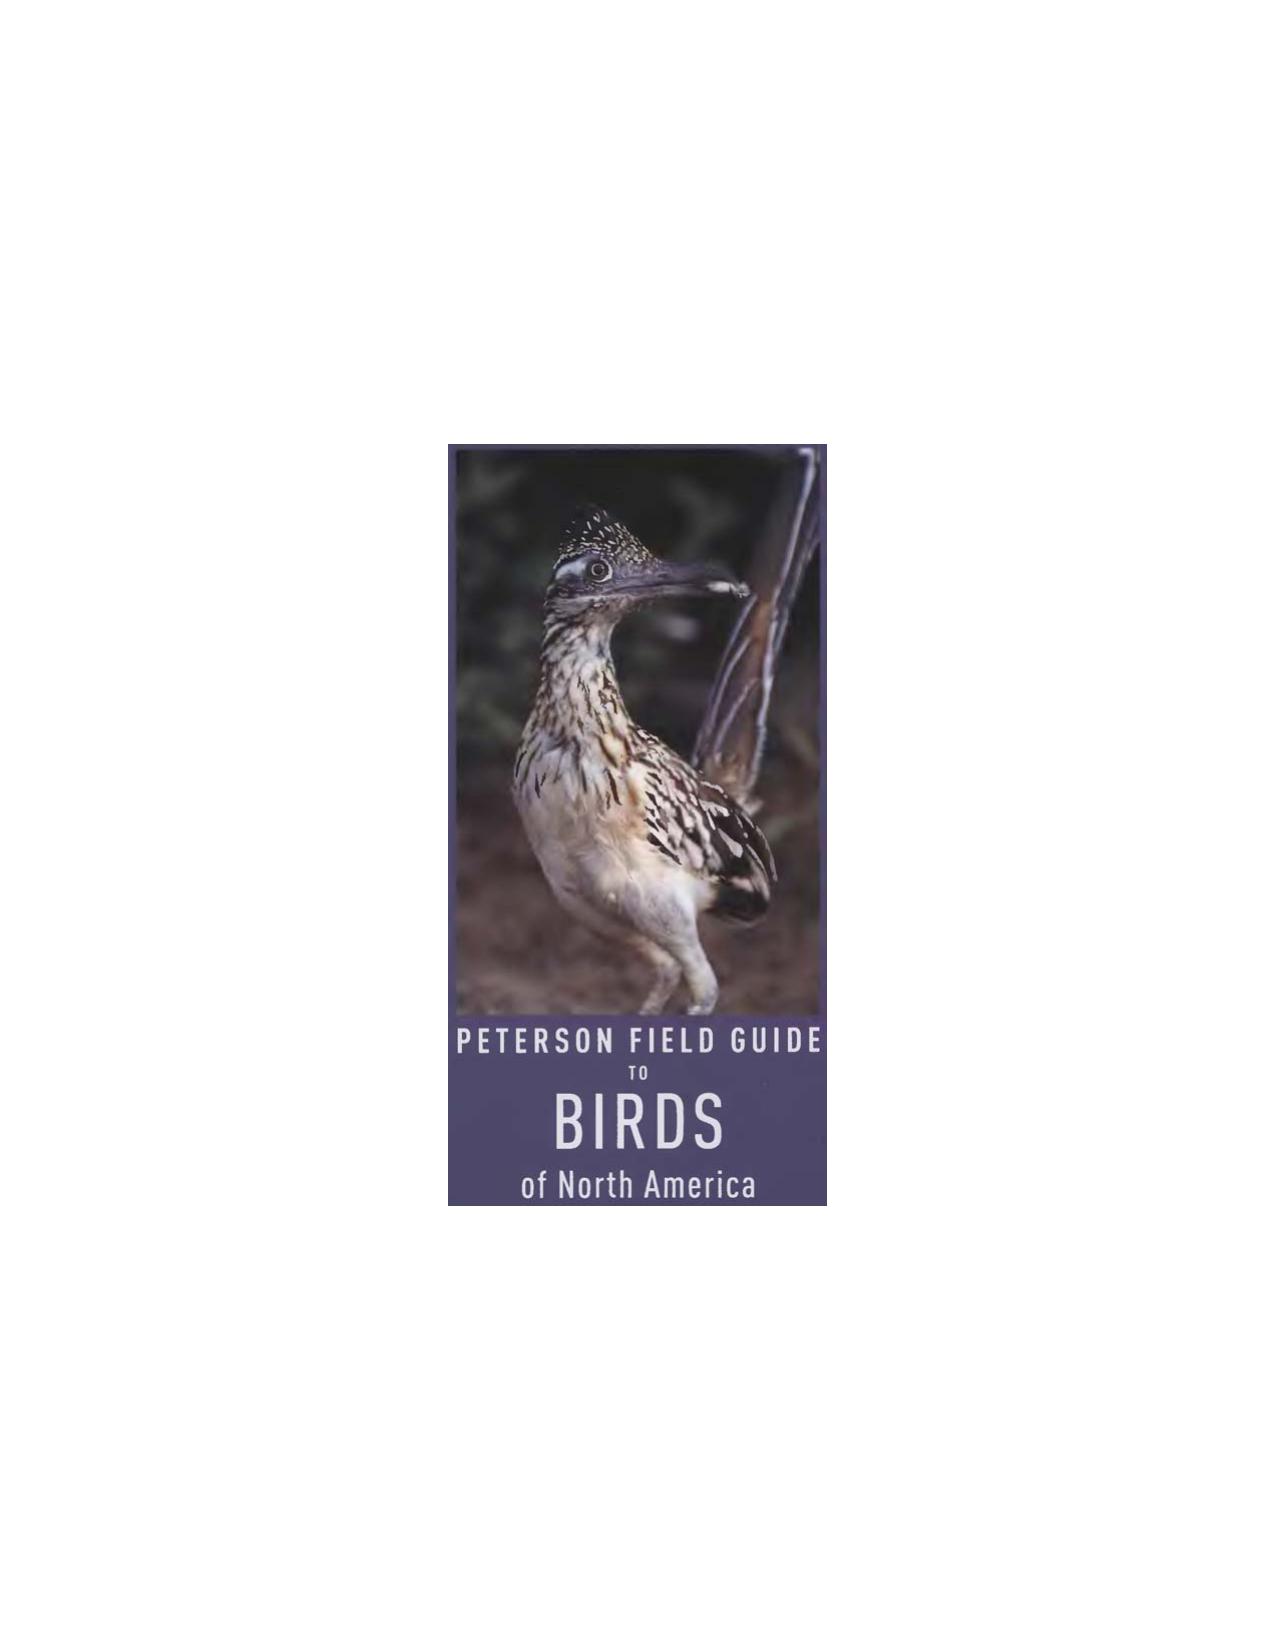 Peterson Field Guide to Birds of North America by Roger Tory Peterson